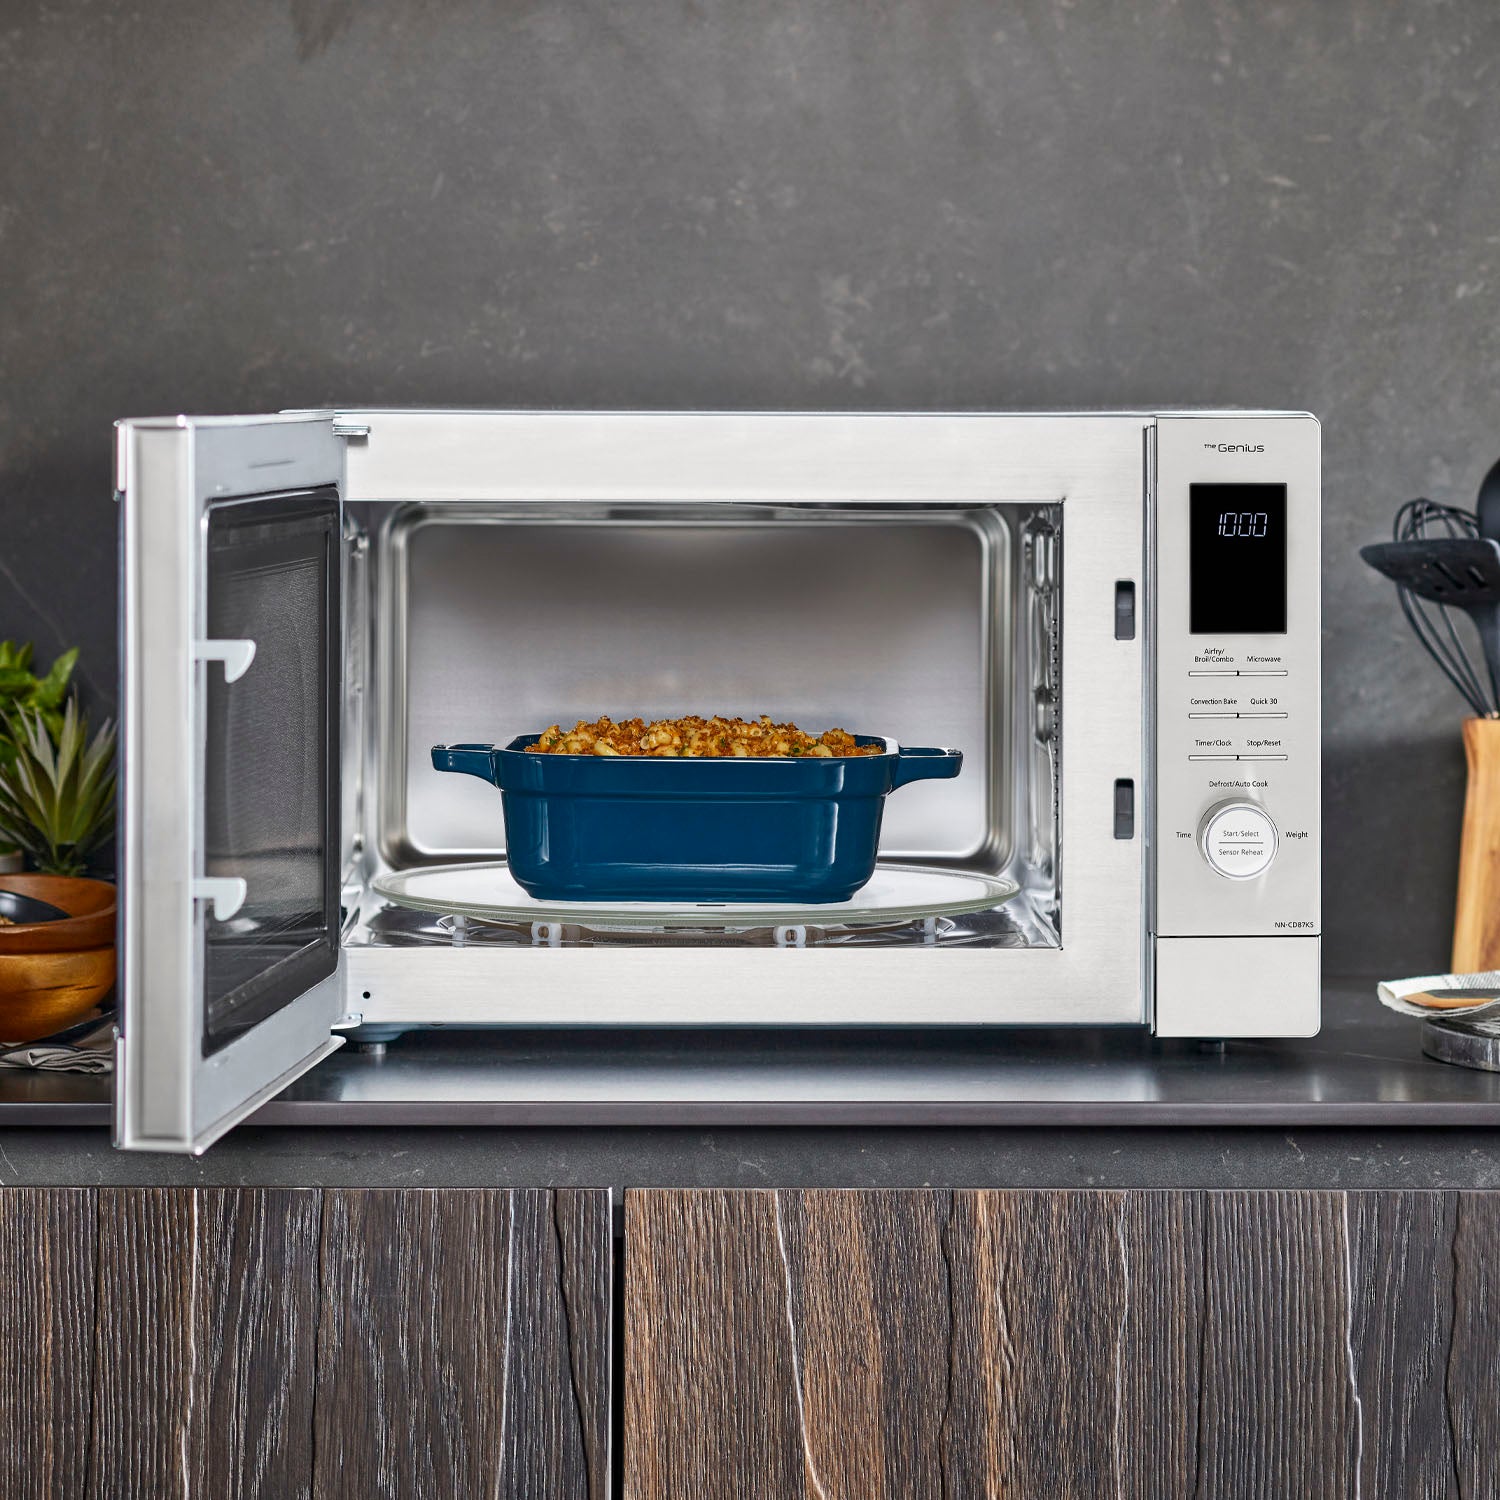 Panasonic HomeCHEF™ 7-in-1 Multi-oven with Steam, Convection Bake